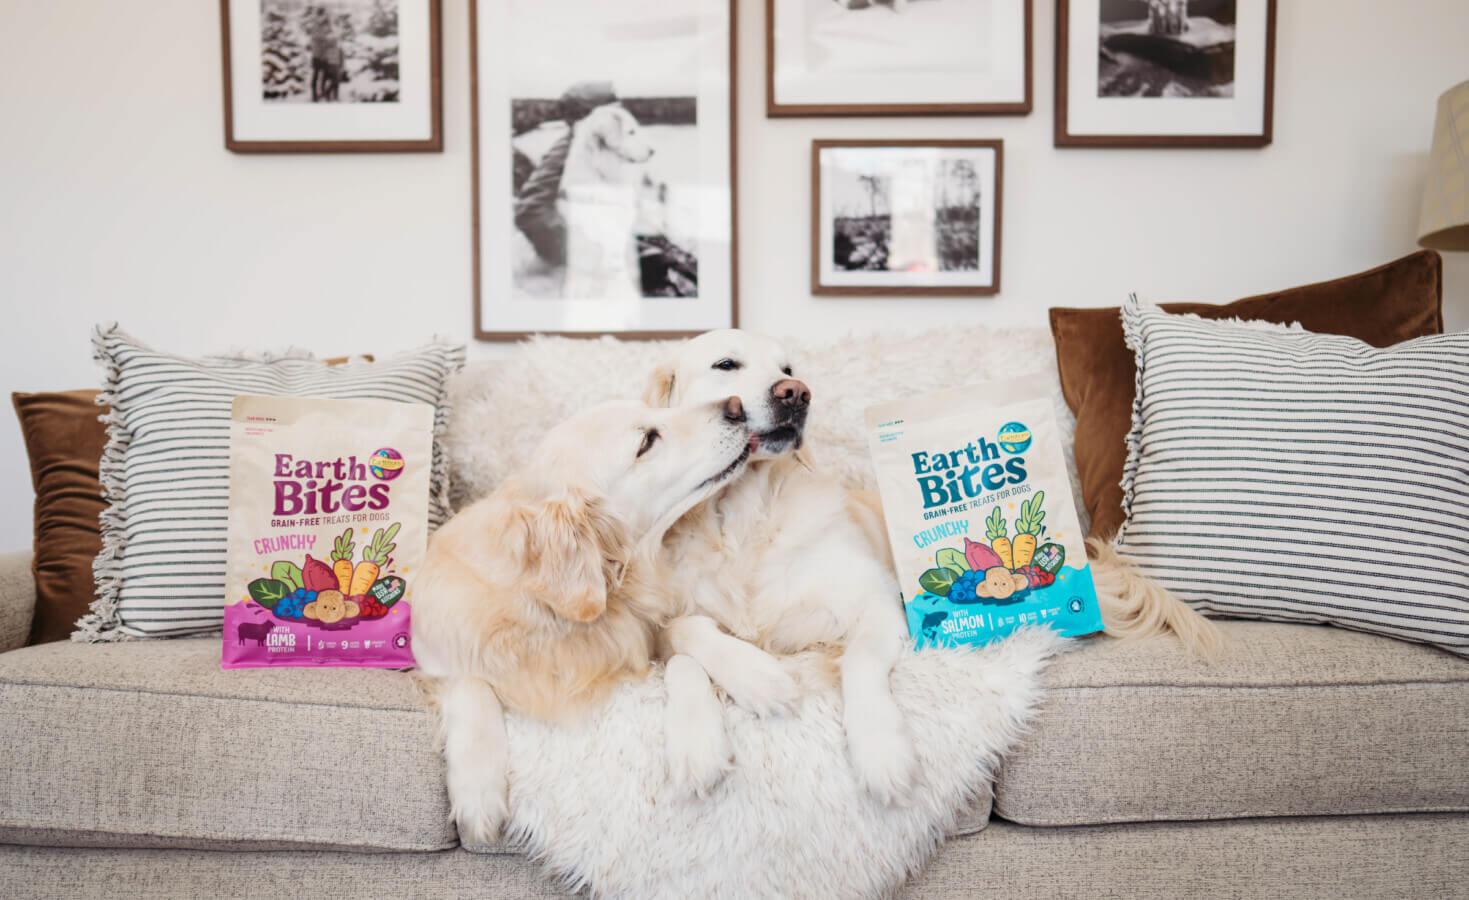 Two dogs cuddle on a couch with two bags of EarthBites Crunchy